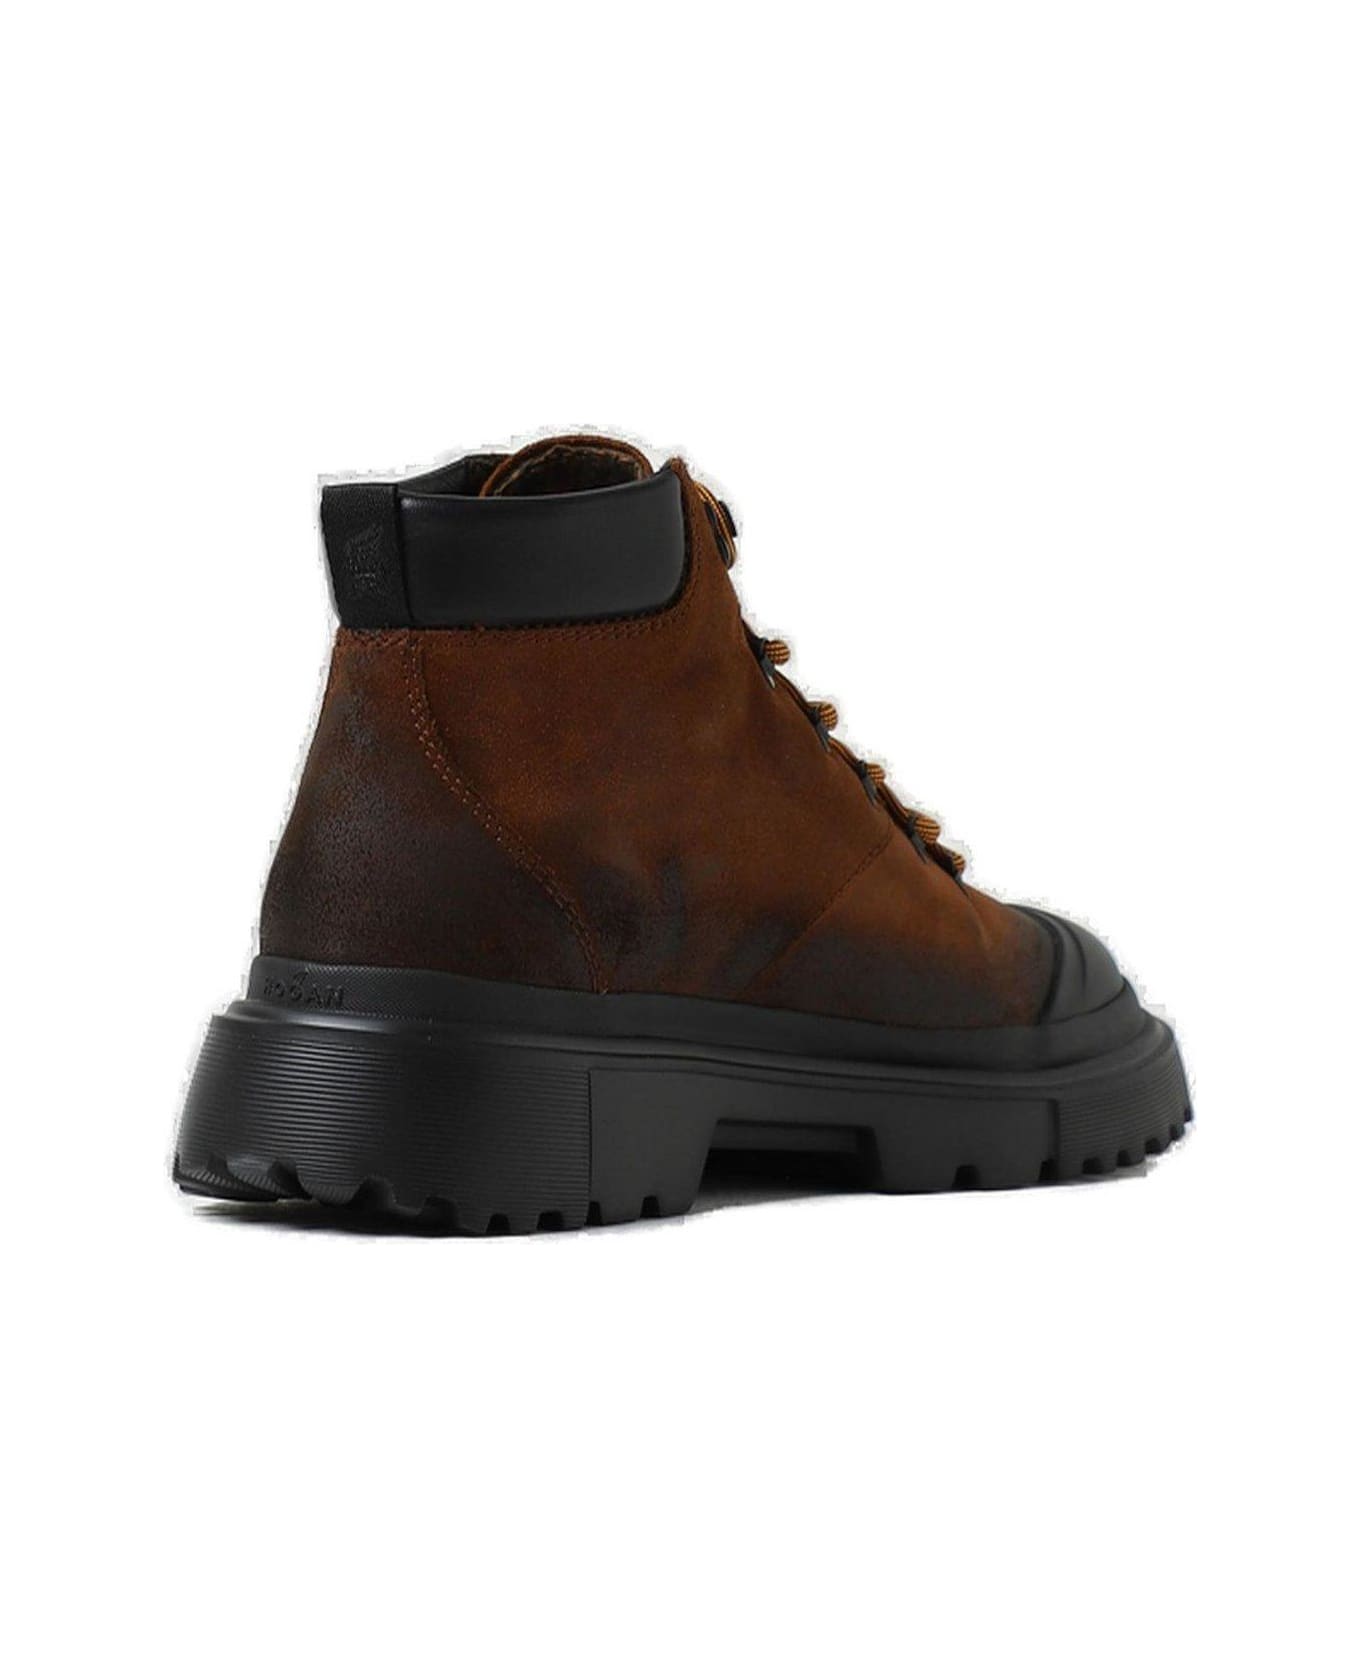 Hogan H619 Chunky-sole Lace-up Boots